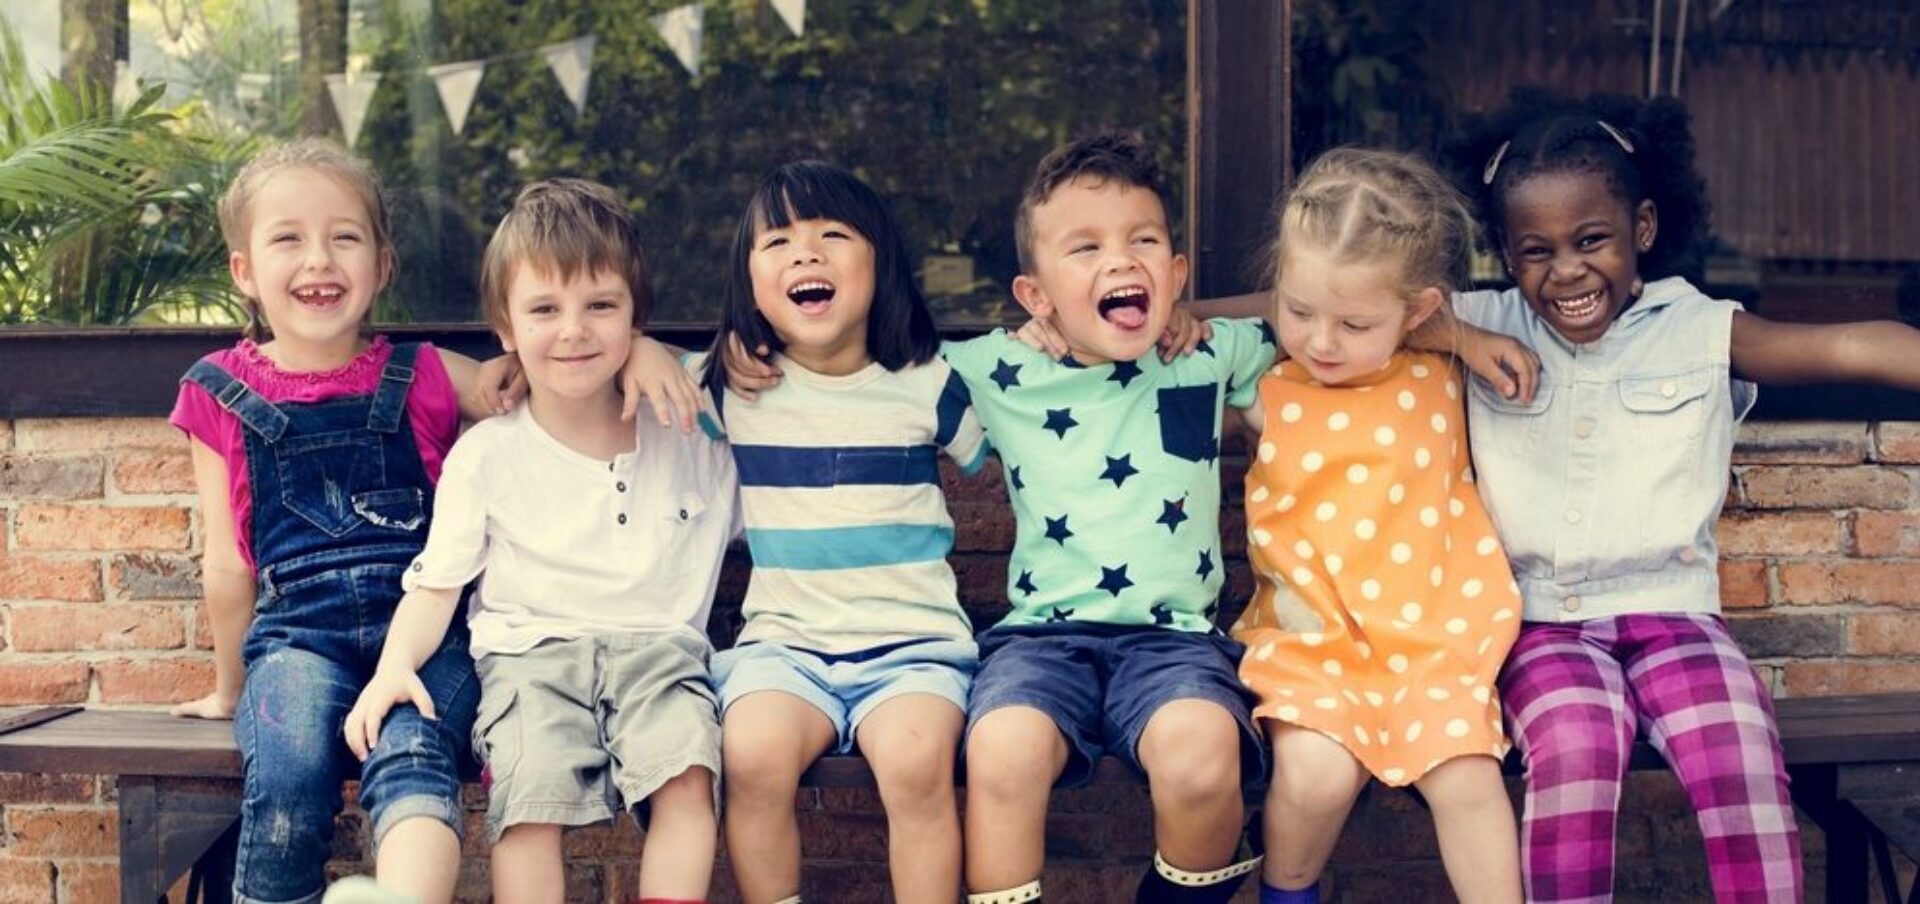 Group of multiethnic children on bench smiling and hugging